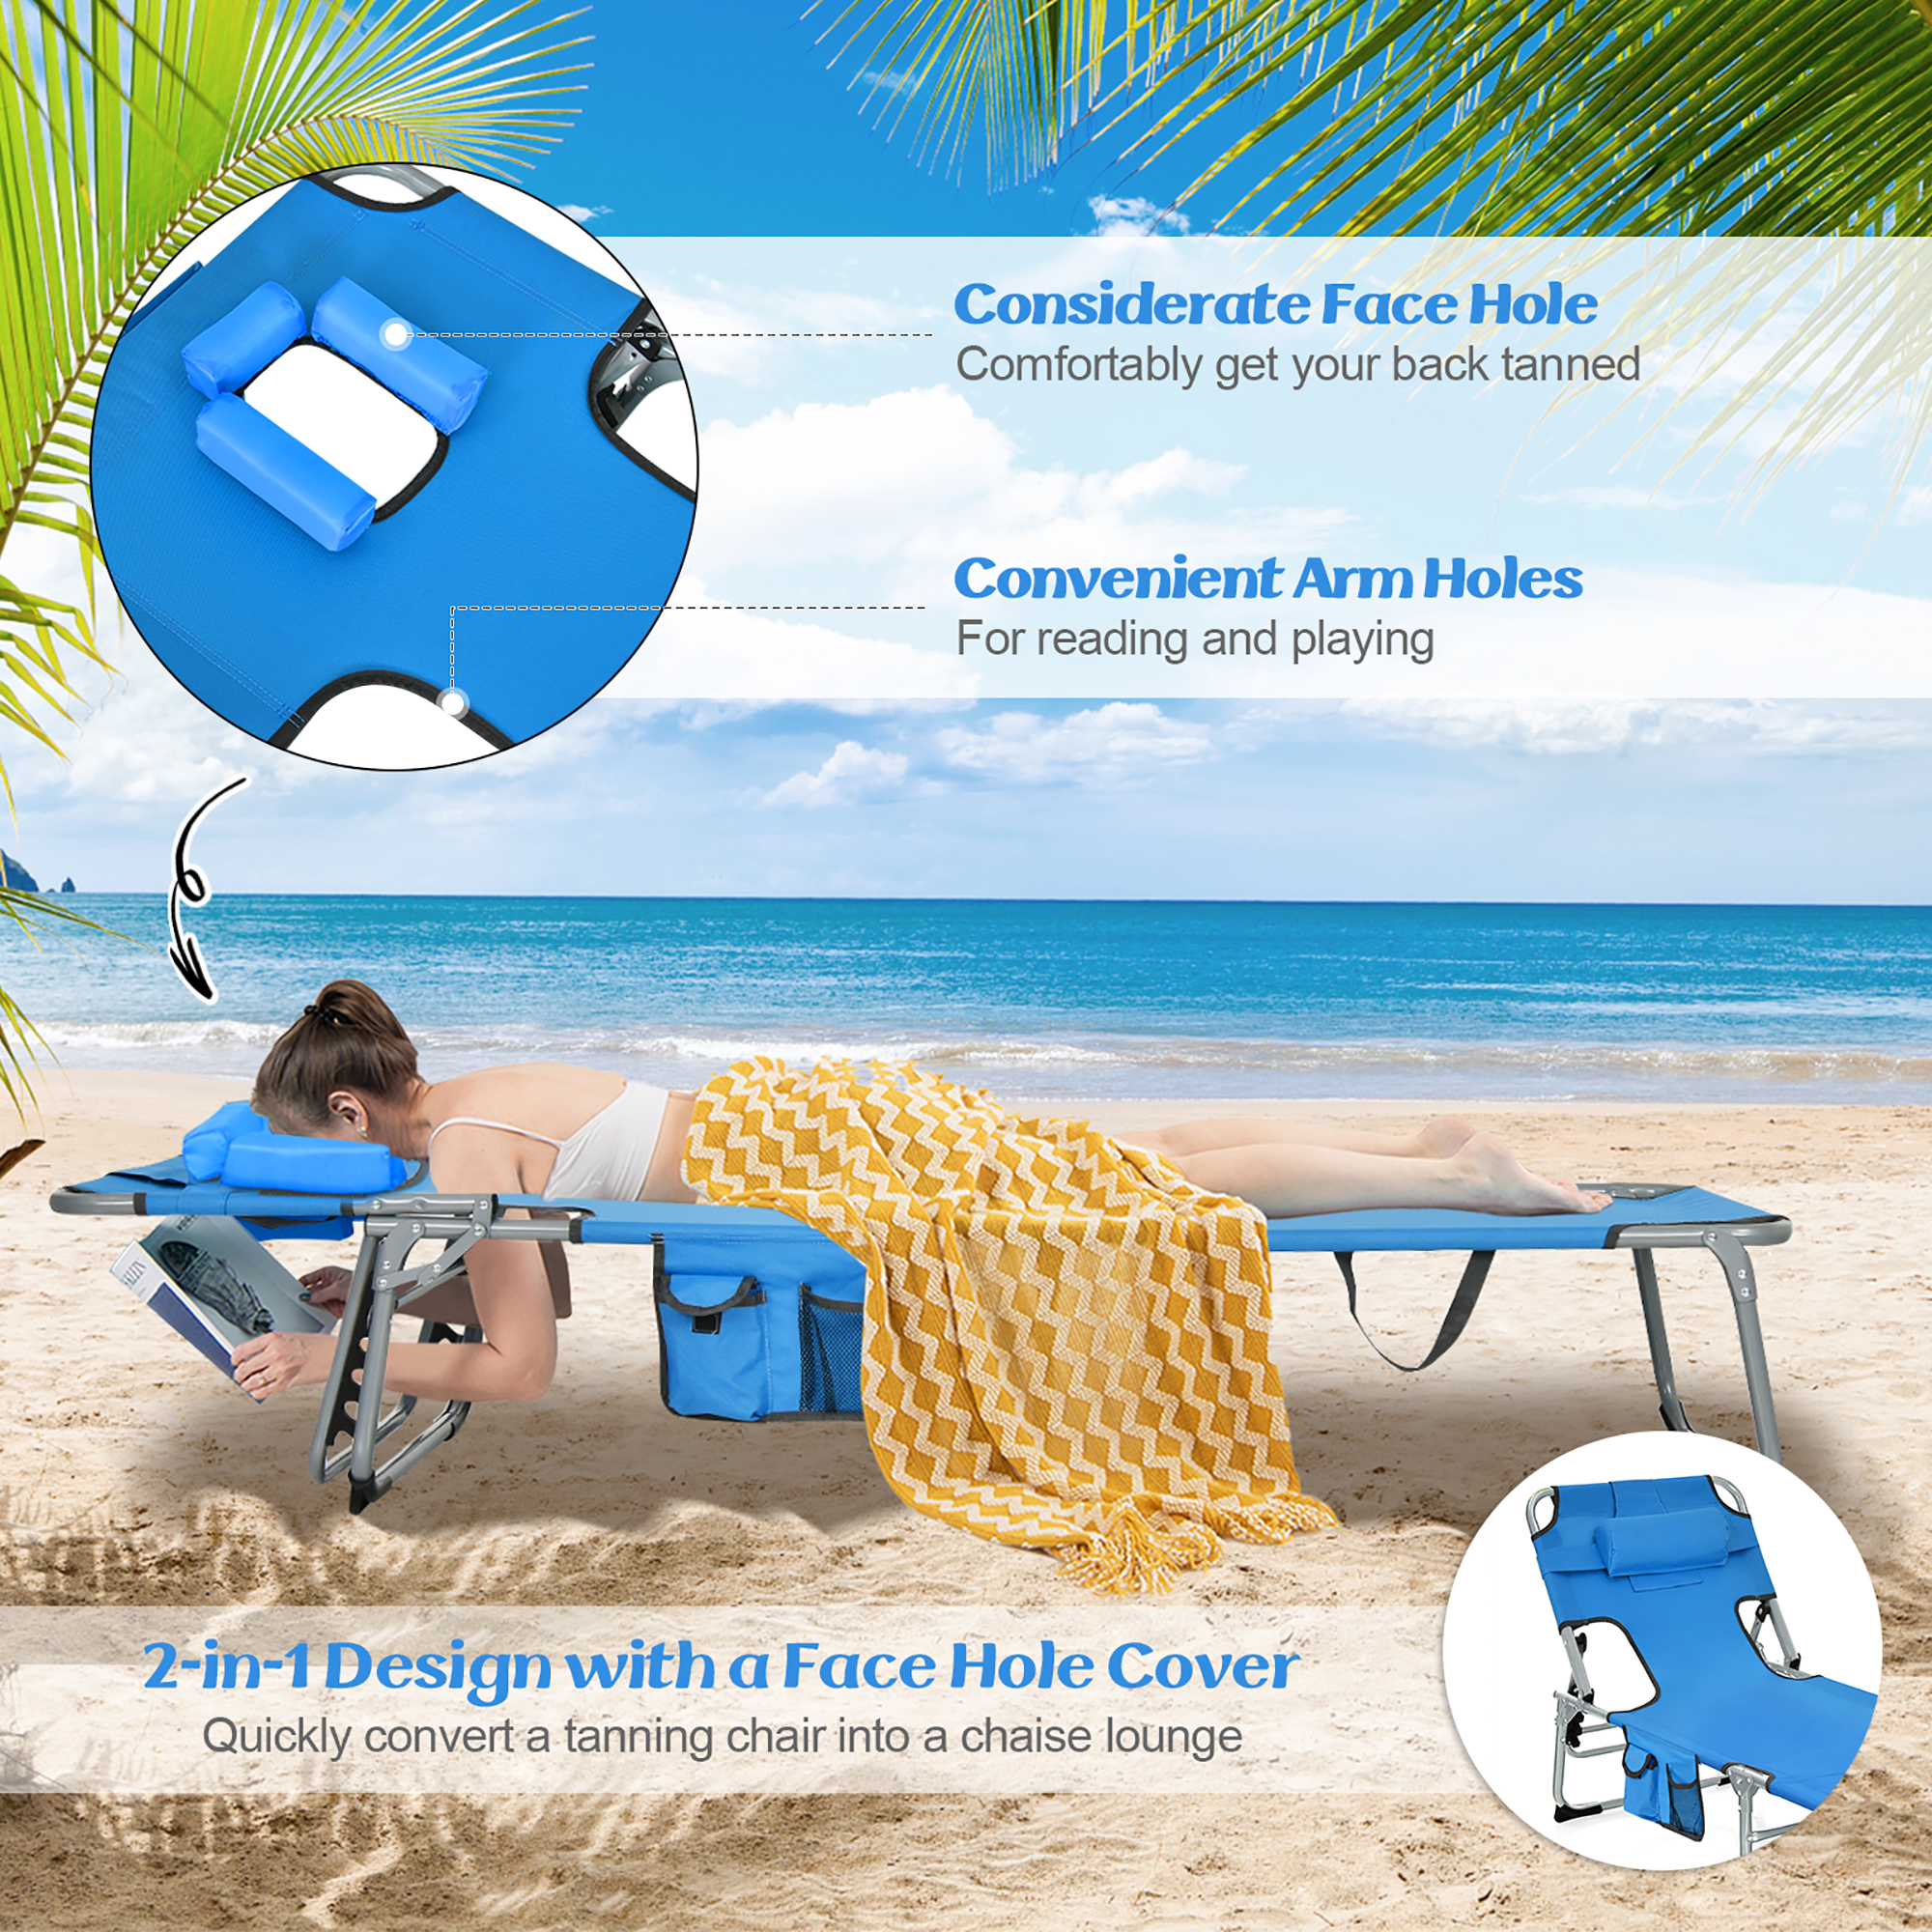 Gymax Folding Chaise Lounge Chair Bed Adjustable Outdoor Patio Beach Camping Recliner Blue - image 5 of 8